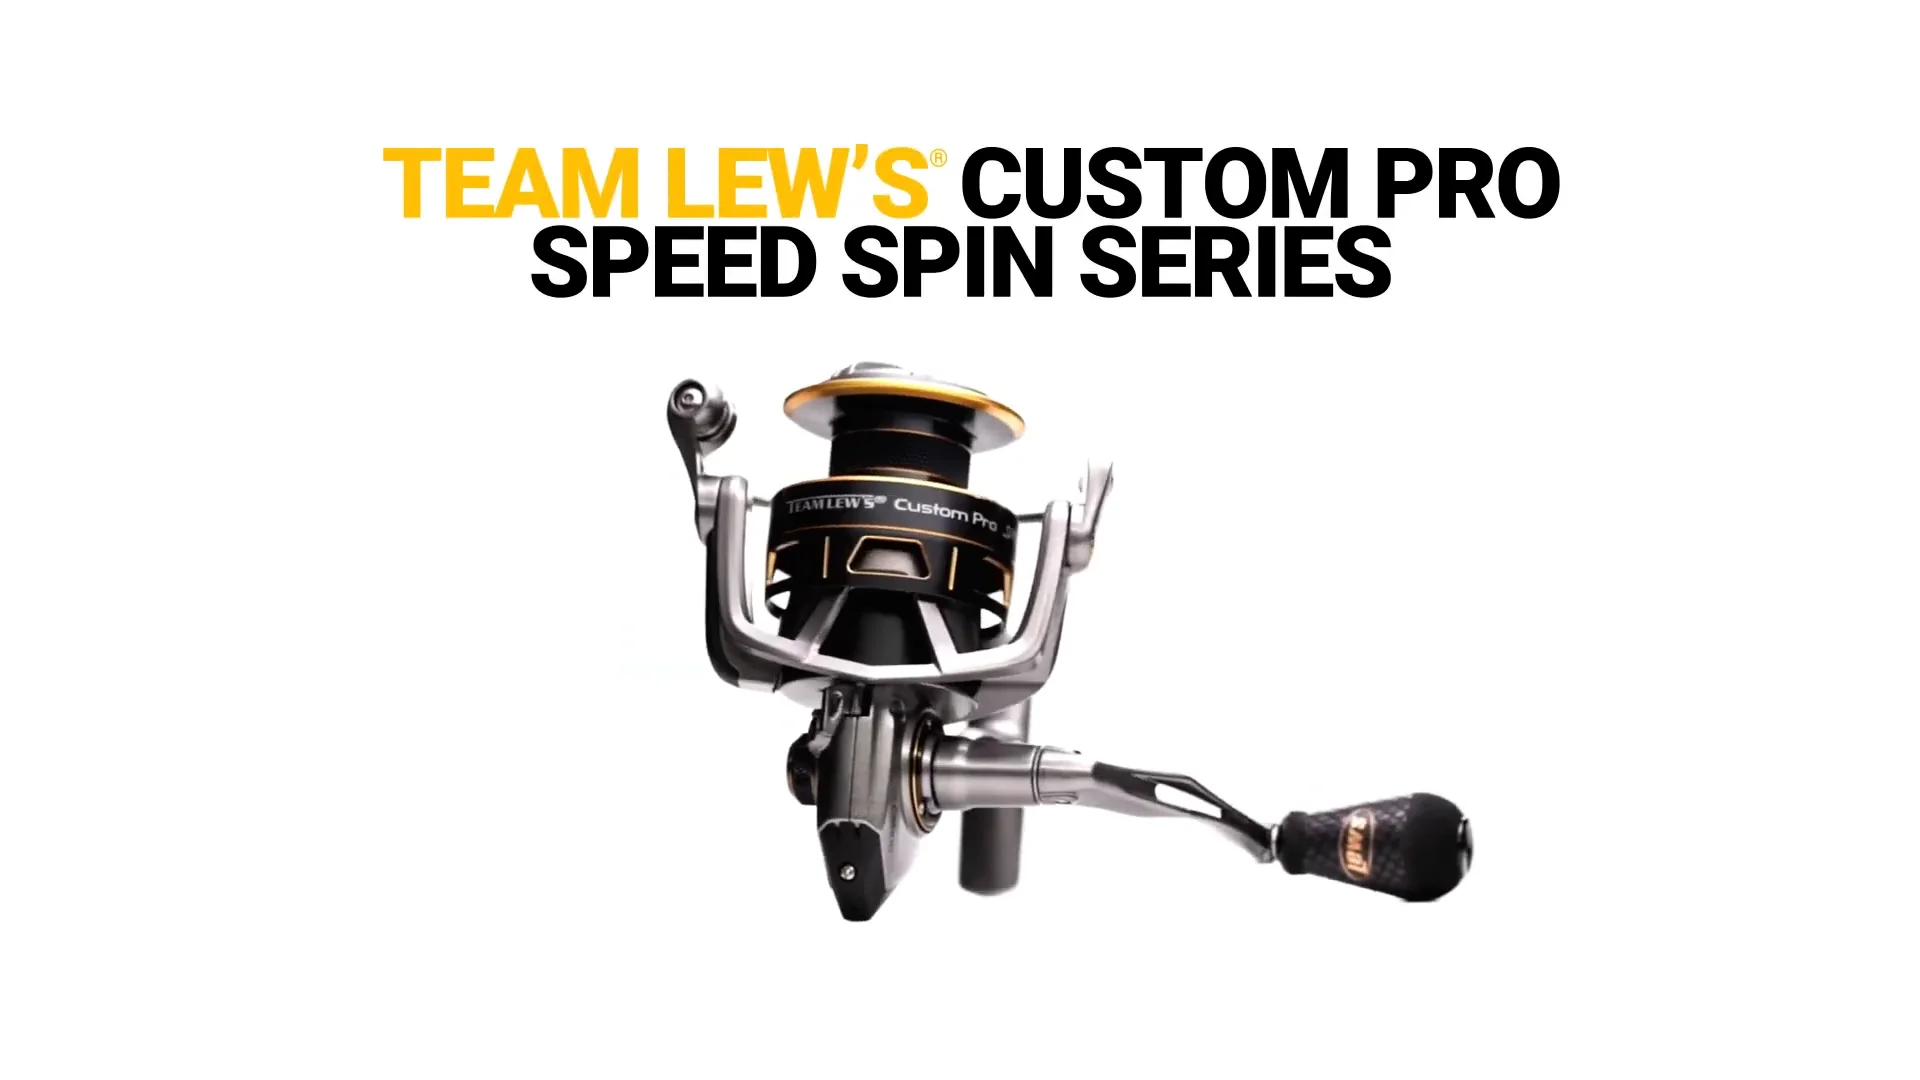 Lew's - Team Lew's Custom Pro Speed Spin Series - Product Features